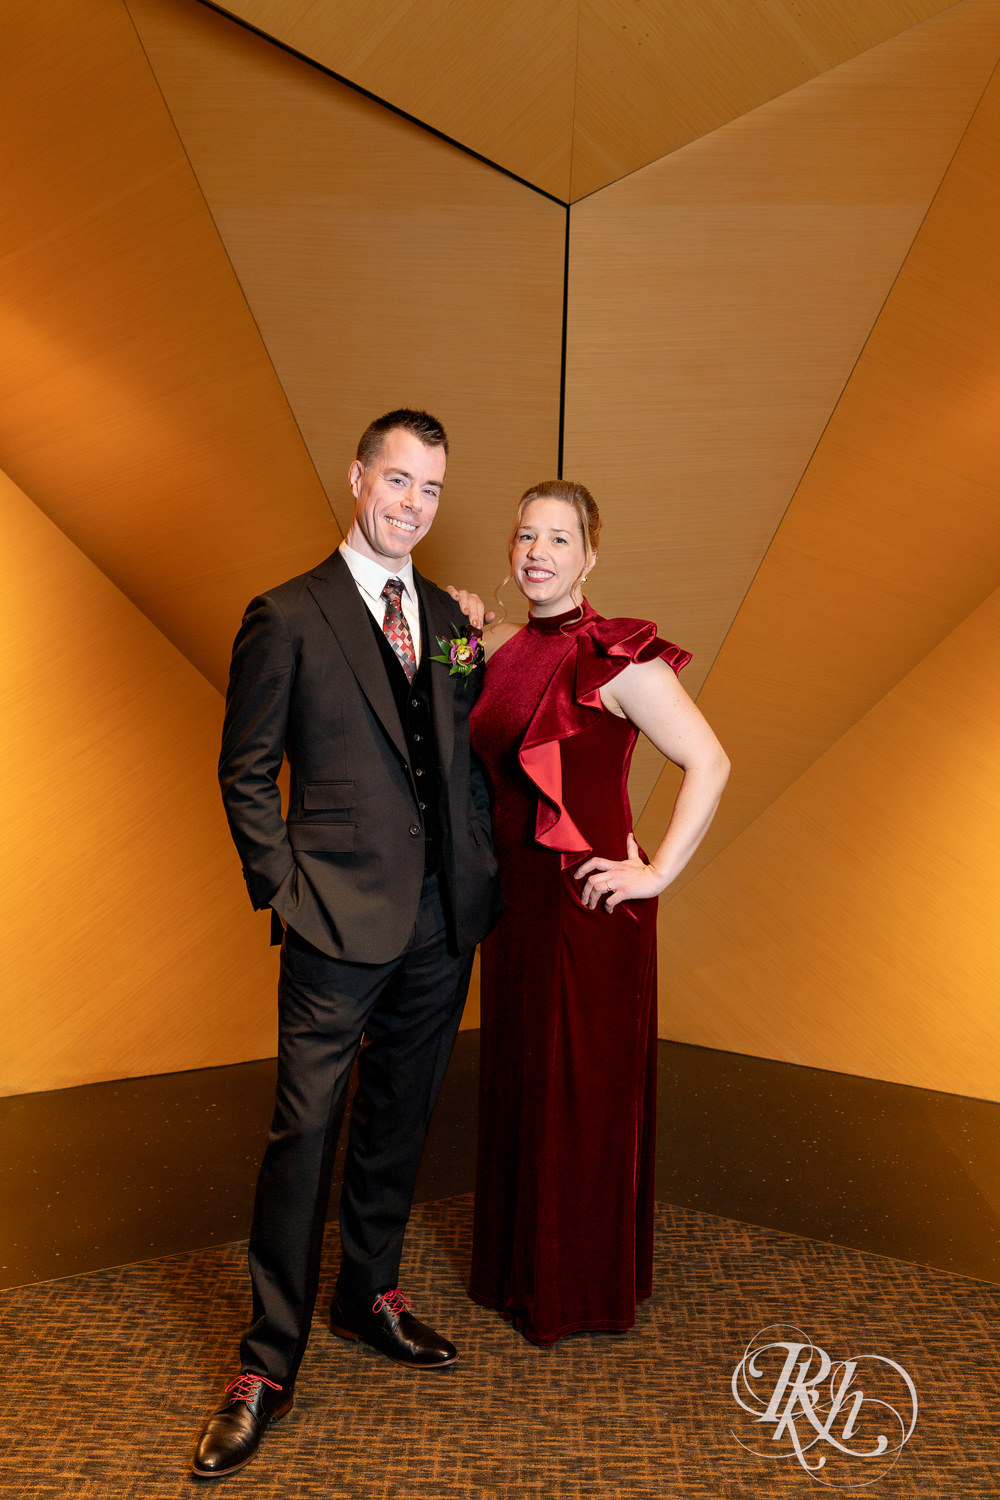 Bride wearing a red colorful wedding dress and groom in a black suit stand in front of a gold wall.